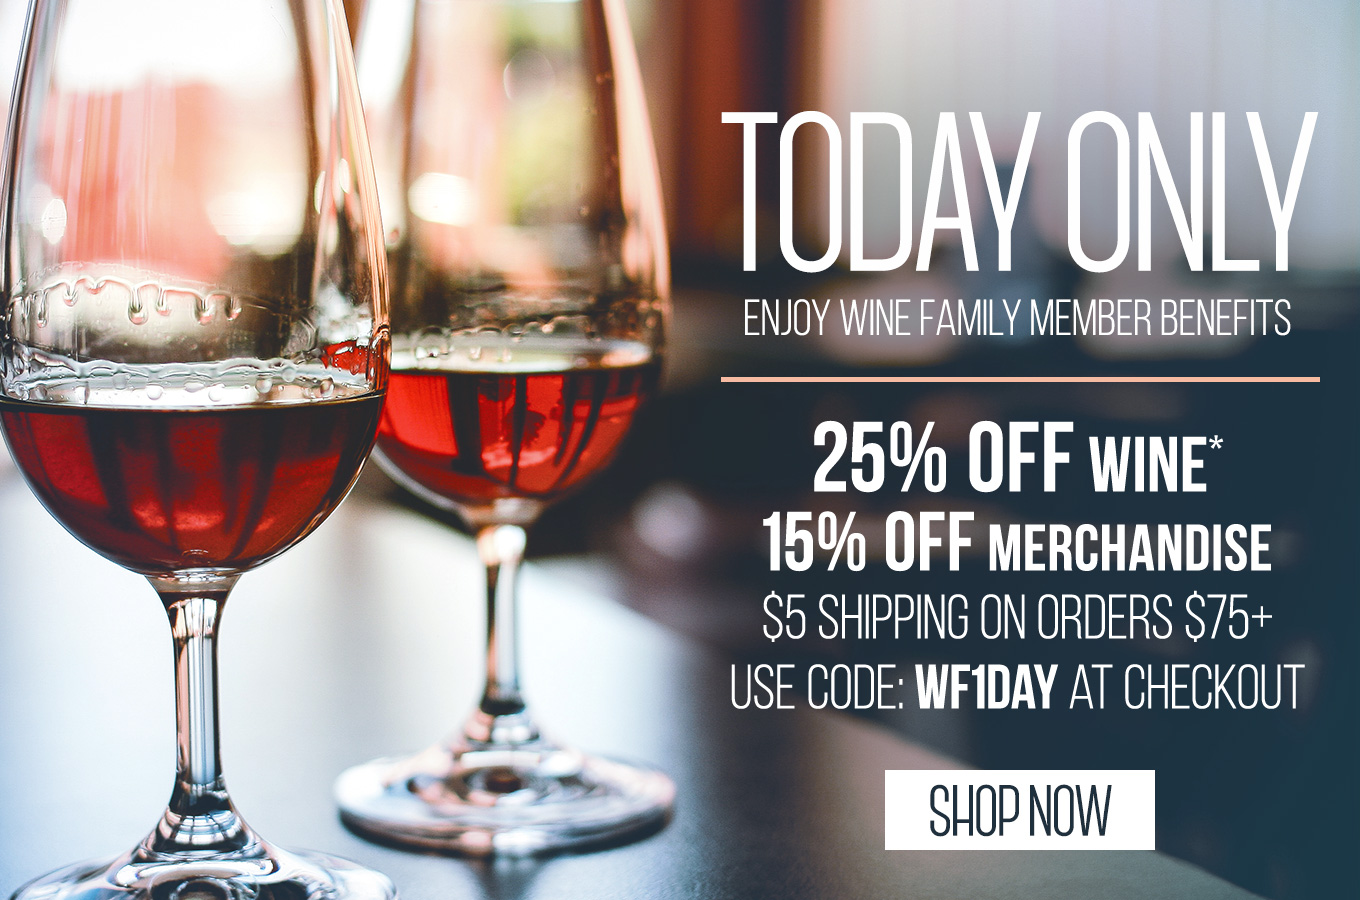 Today Only Enjoy Wine Family Member Benefits 25% OFF Wine & 15% OFF Merchandise* $5 Shipping On Orders of $75+ | Use Code: WF1DAY At Checkout